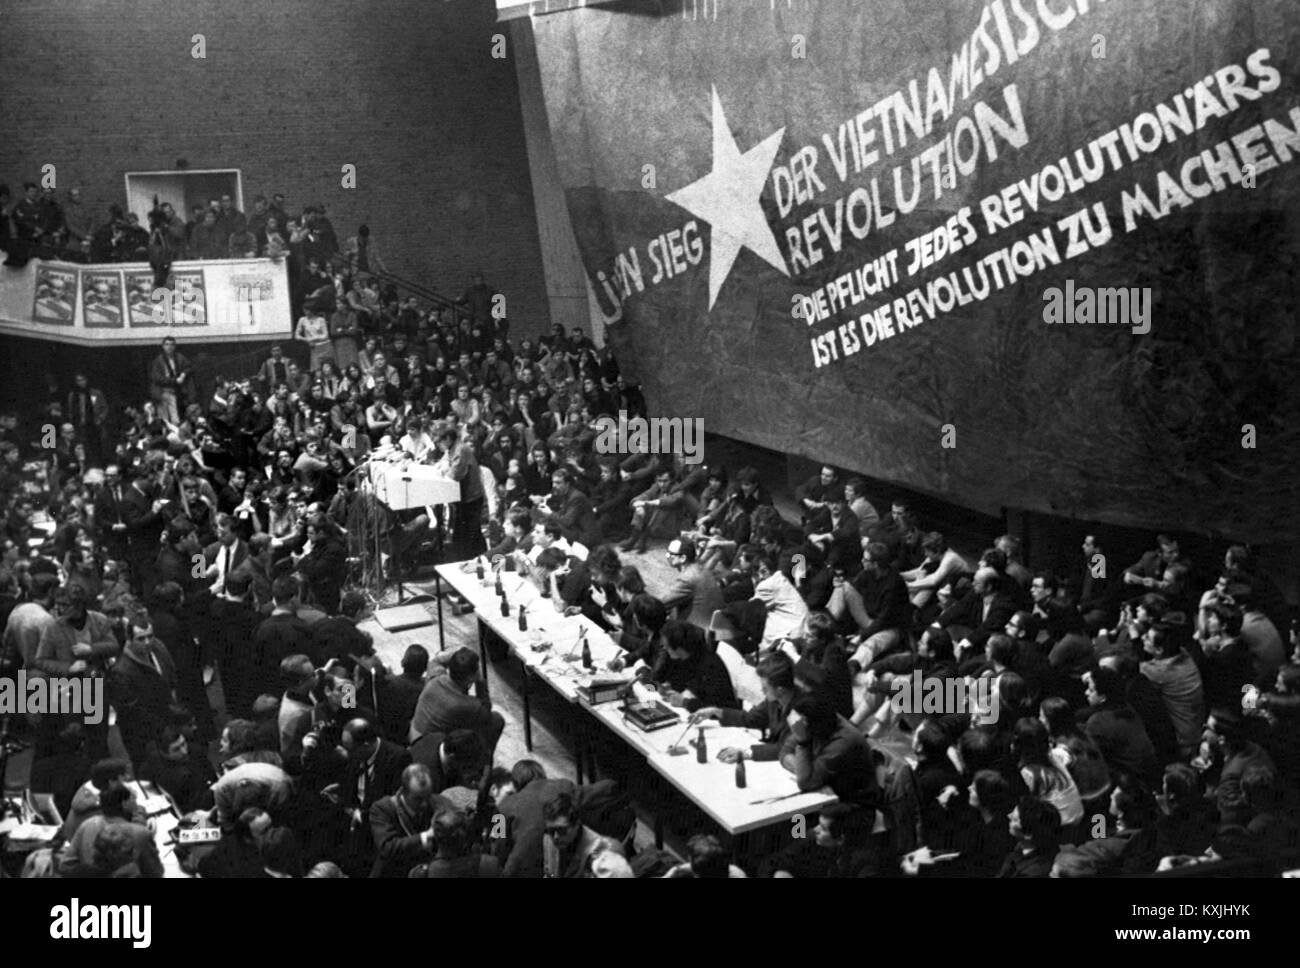 View into the crowded Auditorium Maximum of the Technische Universität in Berlin on February 17,1968 during the 'International Vietnam Conference'. Almost 3,000 people accepted the invitation of the Socialist German Student Union (SDS) and numerous left-wing socialist youth organizations. In the crowded Auditorium Maximum, the predominantly student audience gathered in front of a large Vietkong flag with the slogans 'For the Victory of the Vietnamese Revolution' and 'The duty of every revolutionary is to make revolution'. | usage worldwide Stock Photo